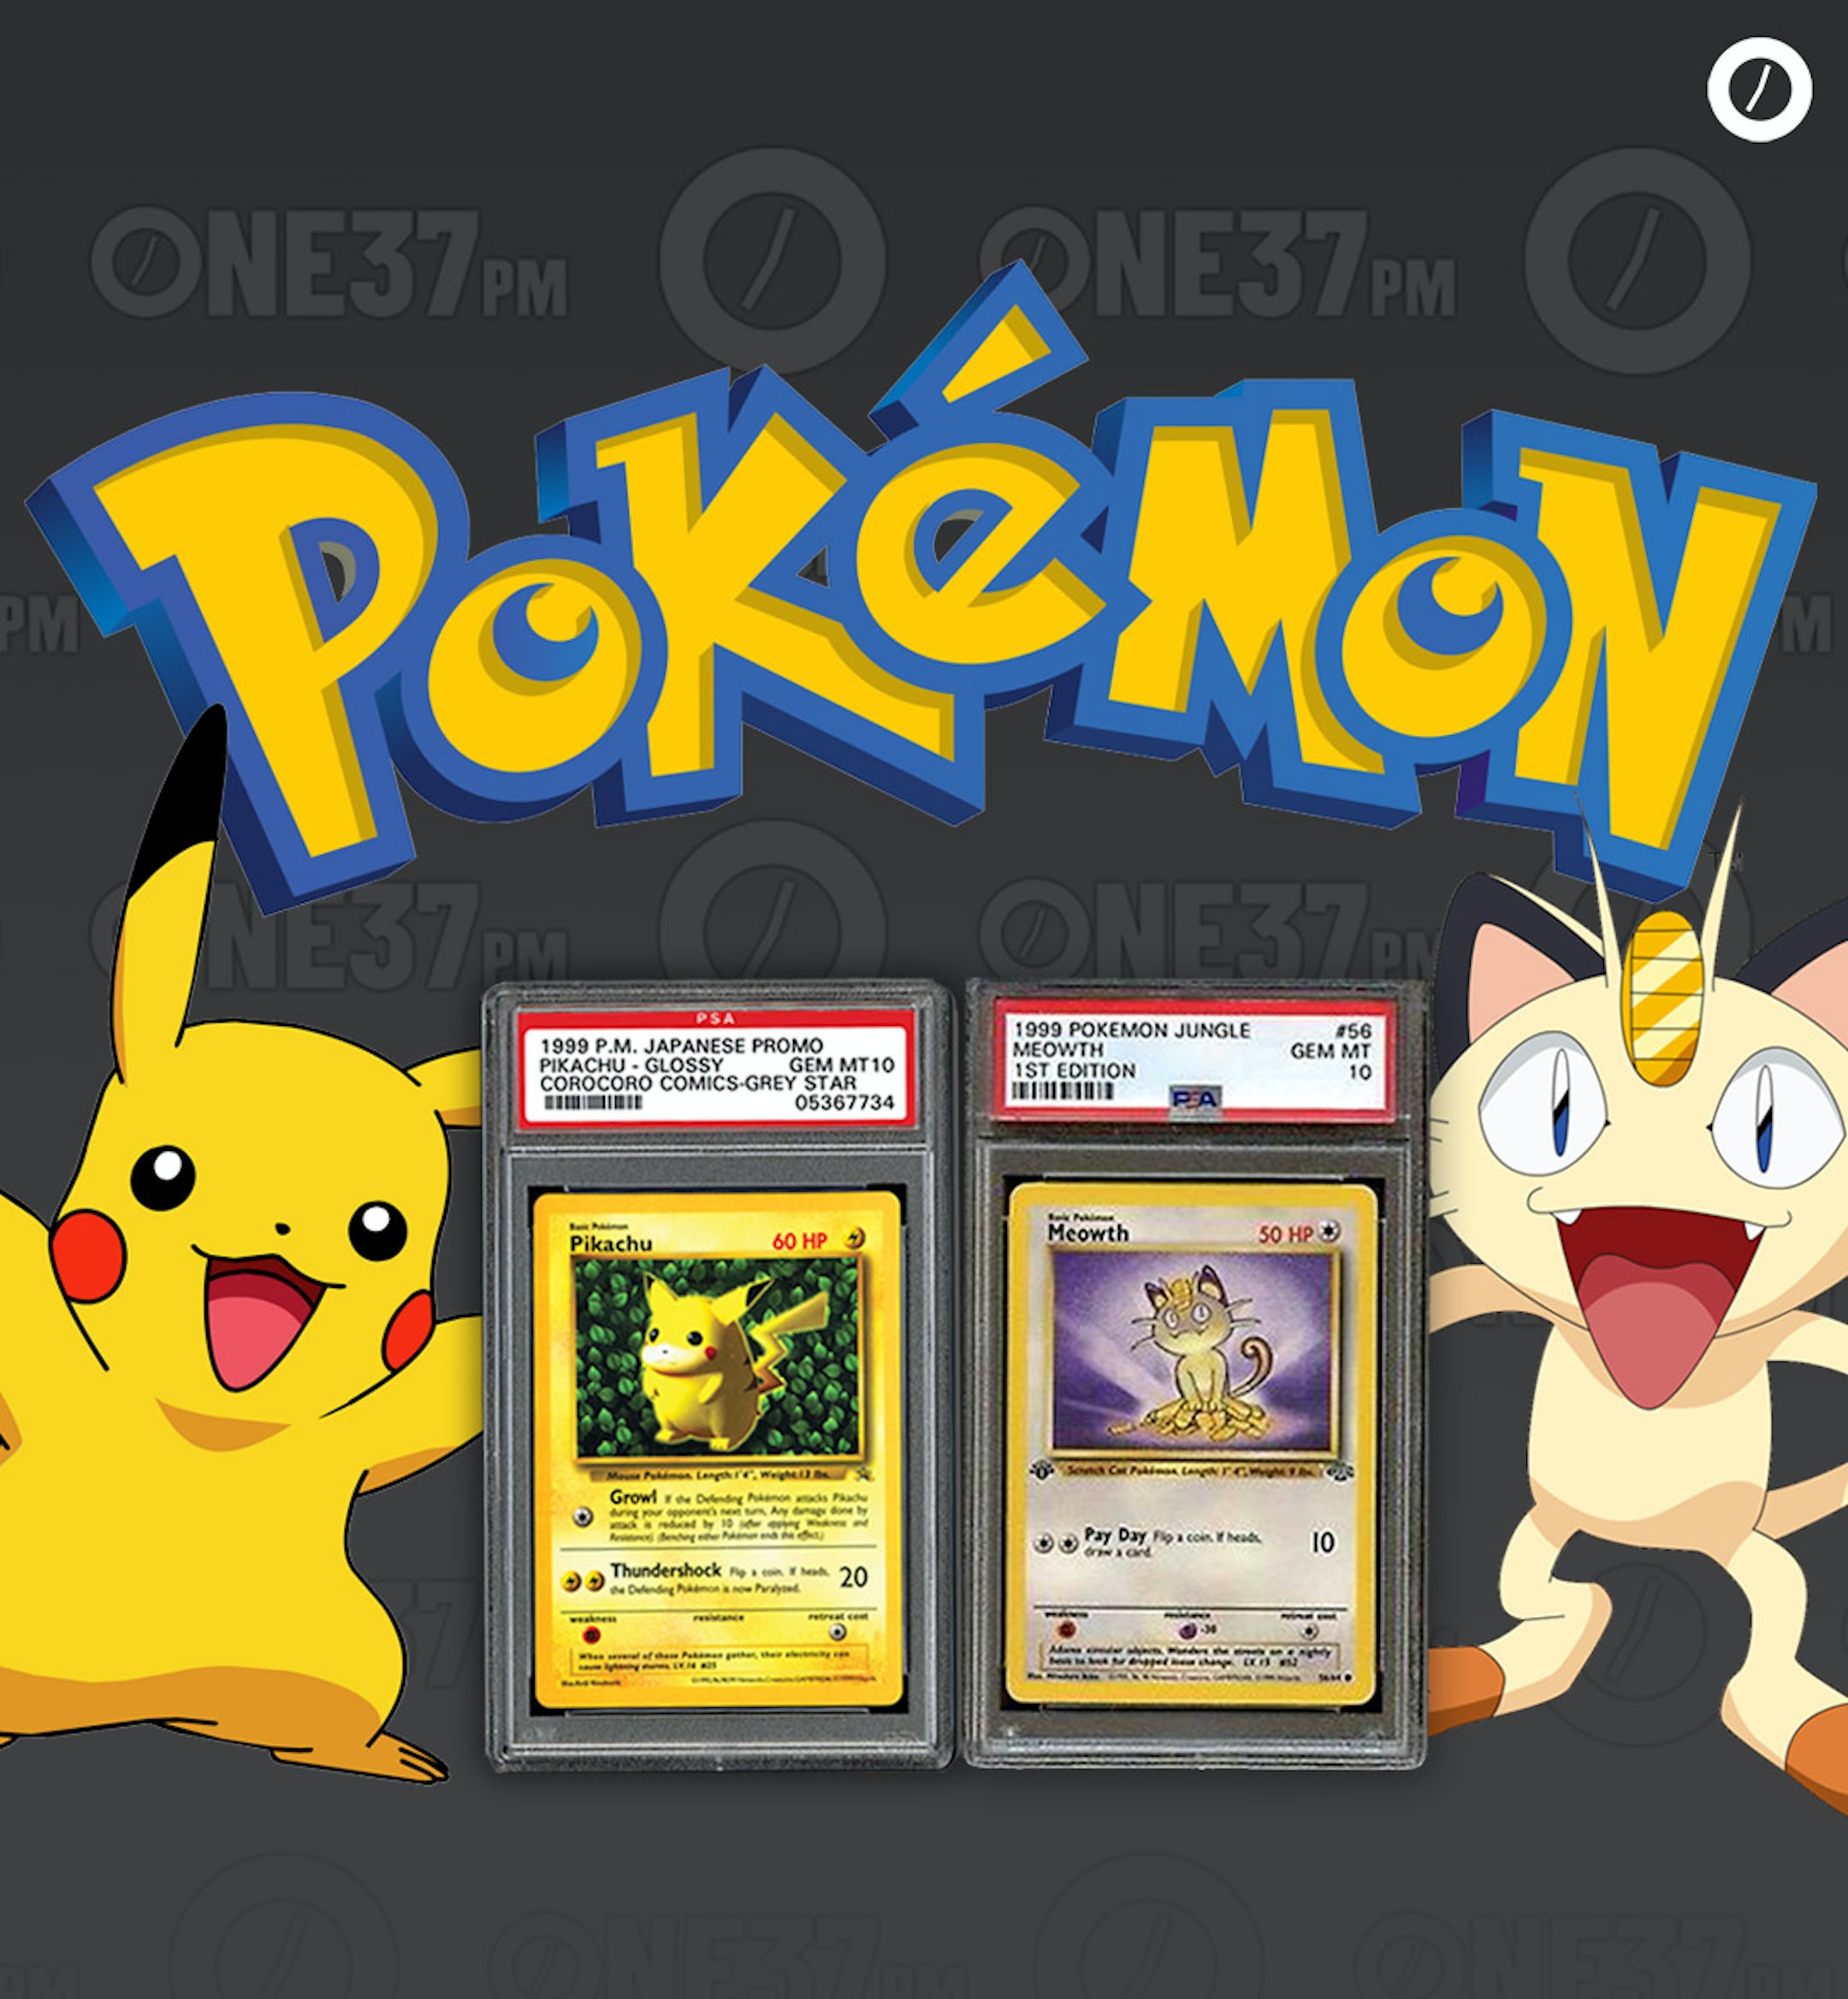 10 Best Deals for Pokemon Cards on eBay // ONE37pm